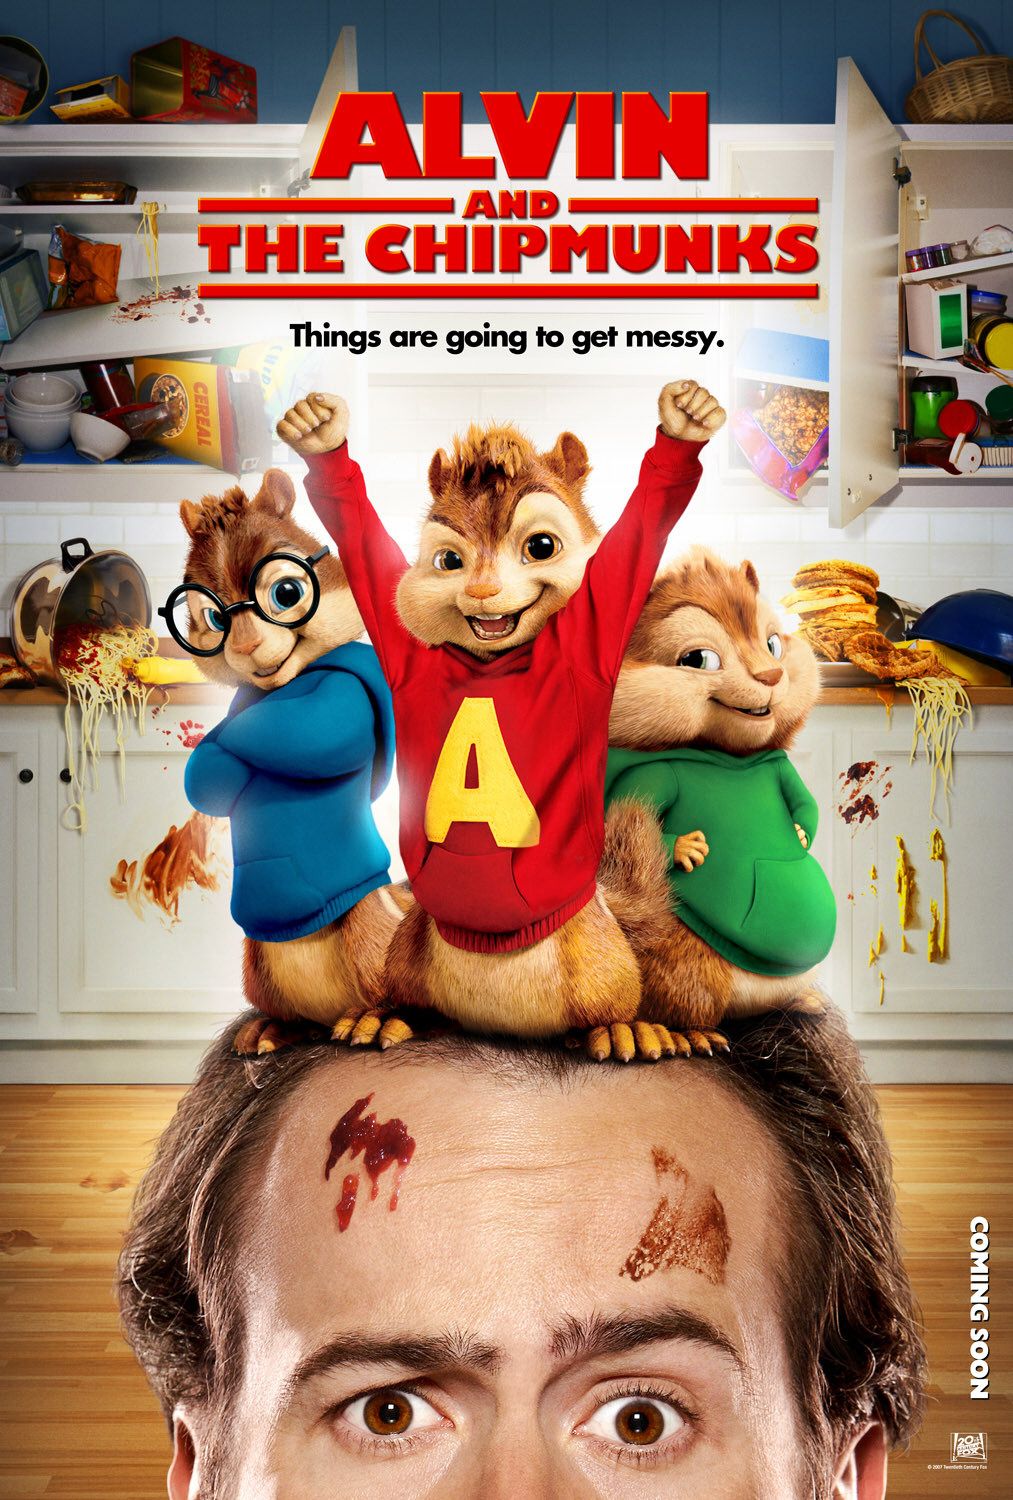 alvin and the chipmunks 2007 full movie free